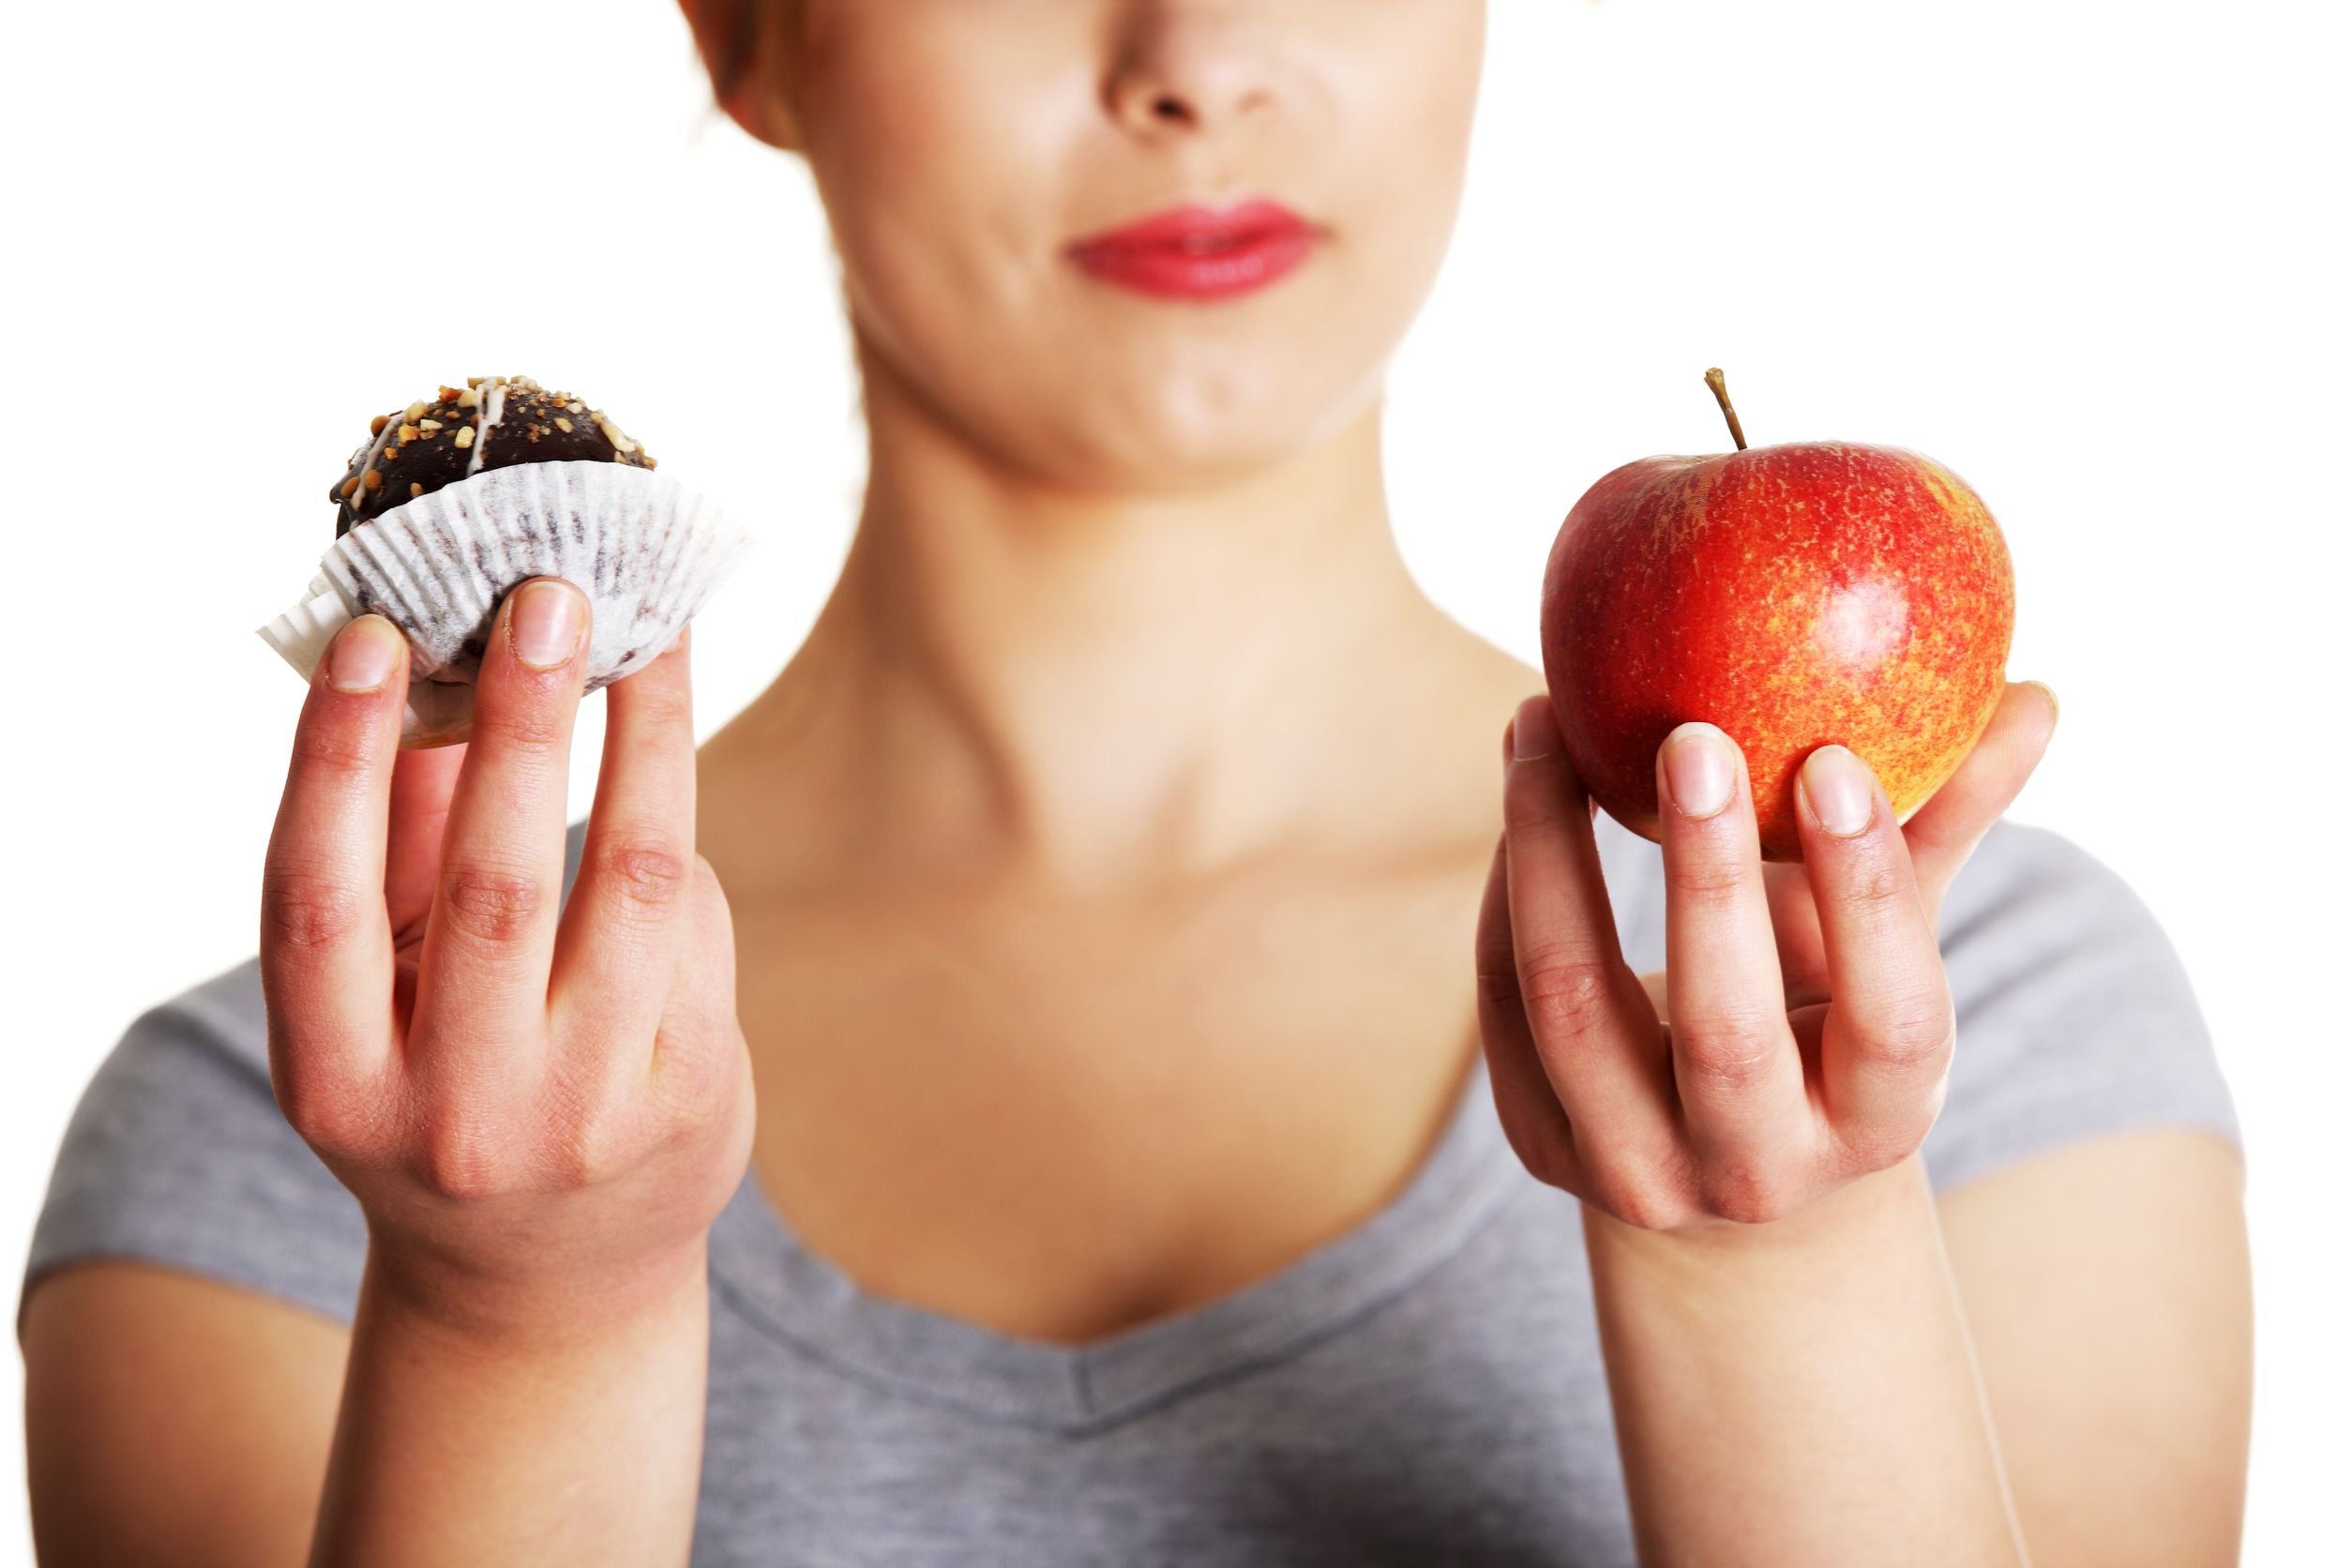 6 Tips to Stop Sugar Cravings for Good